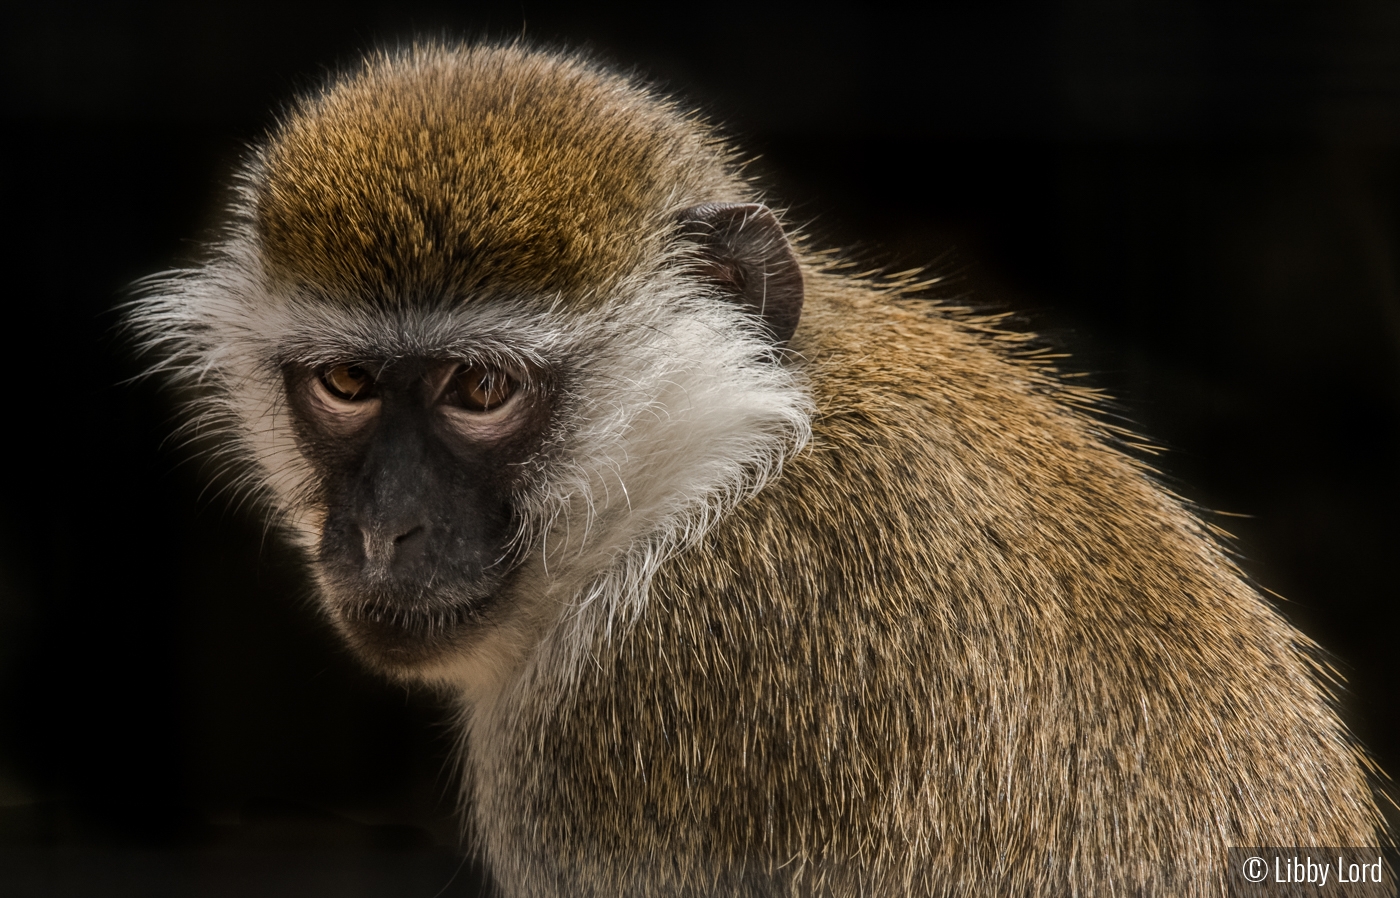 Pensive Monkey by Libby Lord